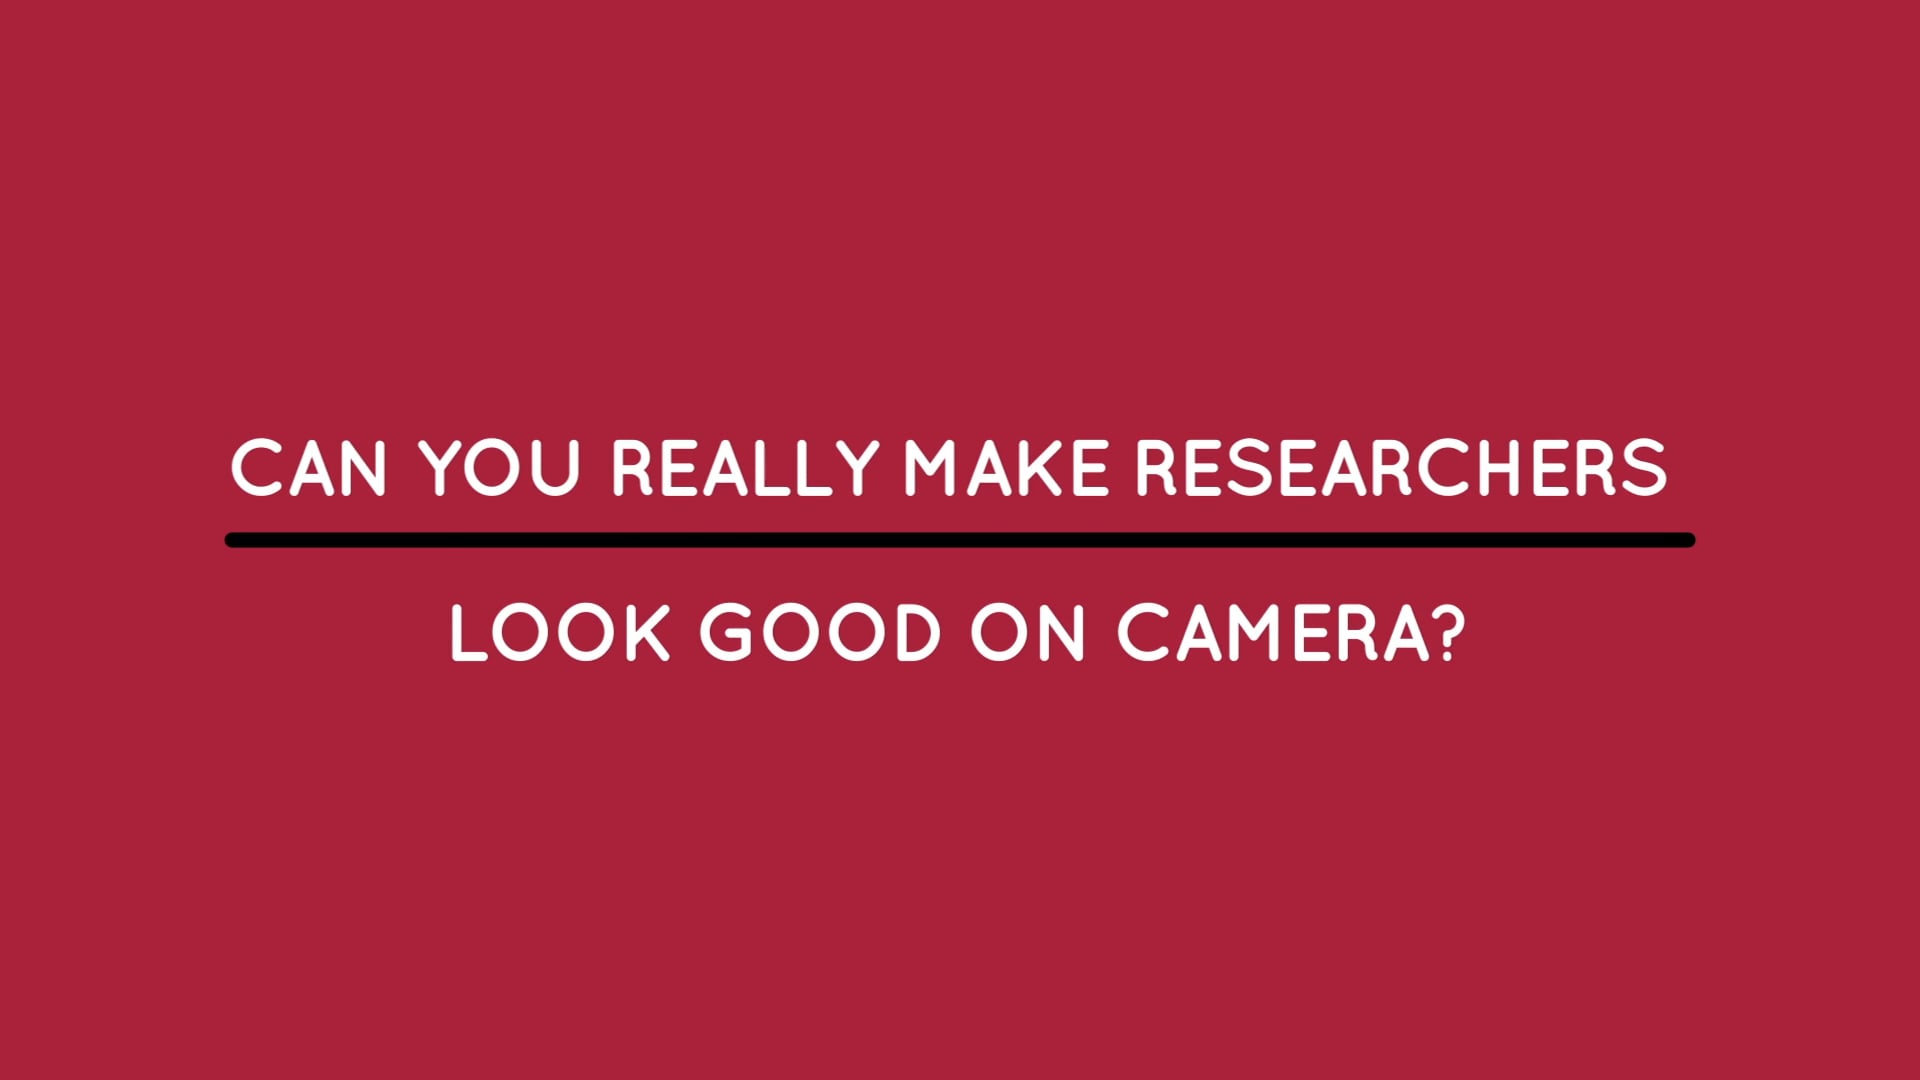 can-you-make-researchers-look-good-on-camera-faq11-on-vimeo